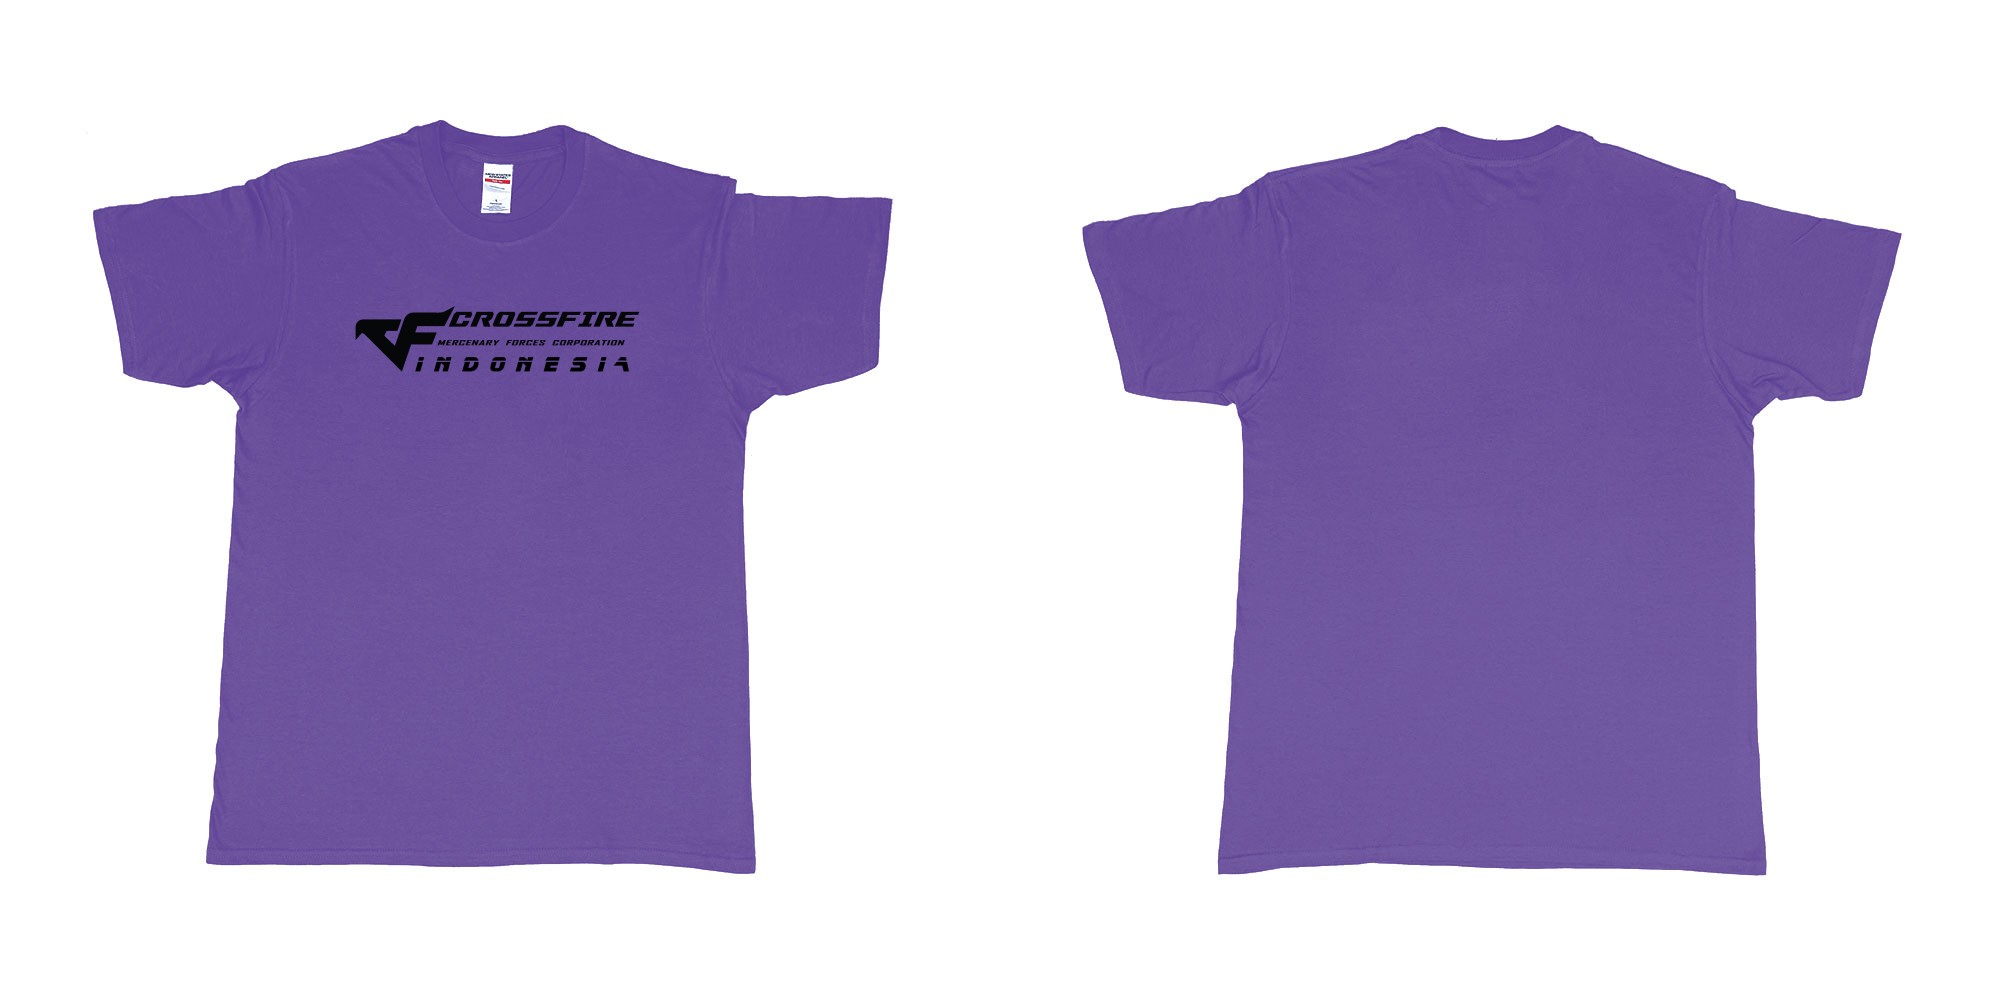 Custom tshirt design cfindo crossfire indonesia tshirt in fabric color purple choice your own text made in Bali by The Pirate Way